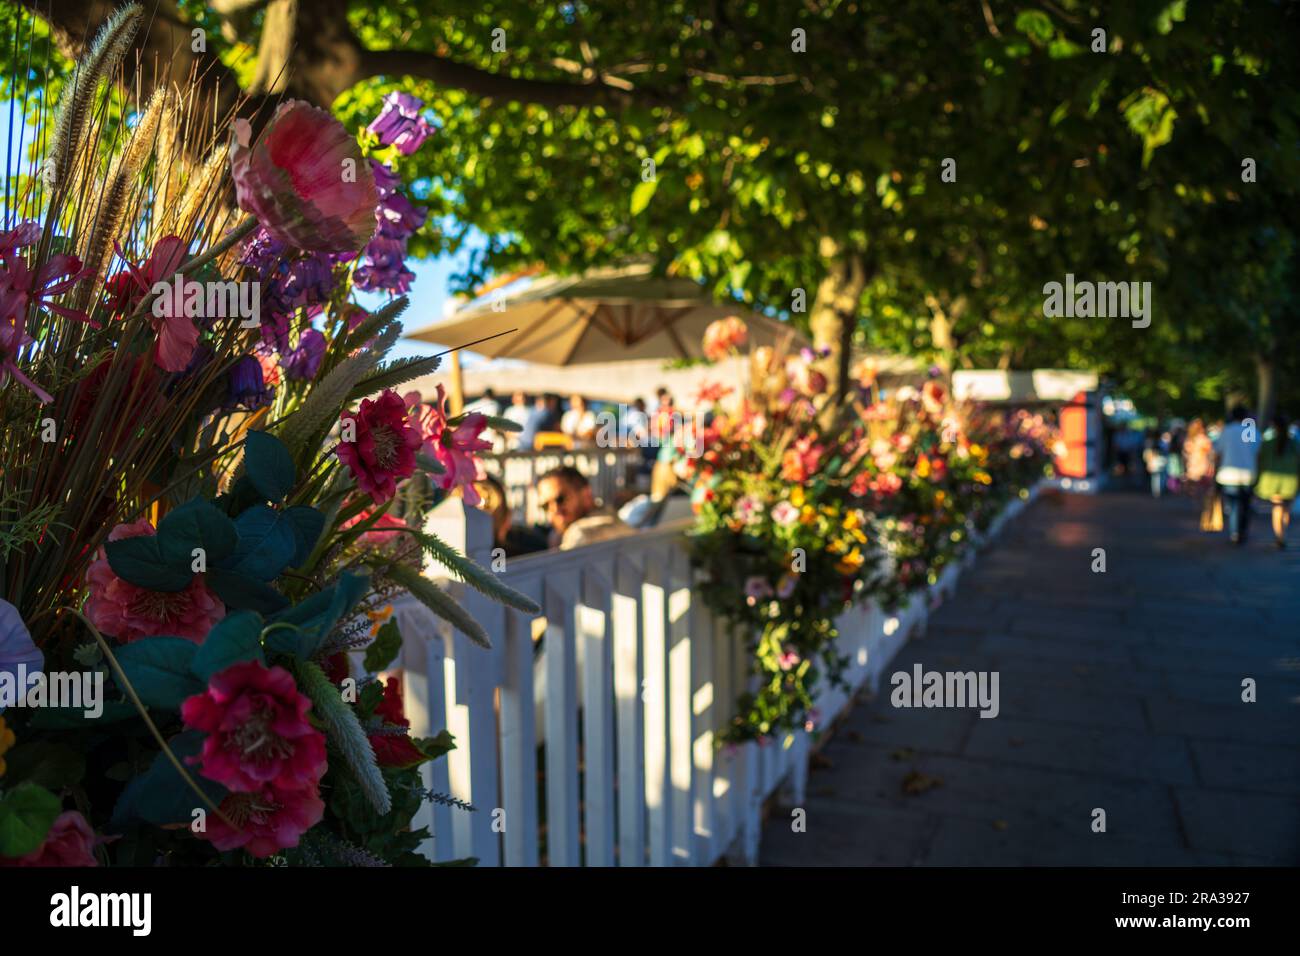 Unrecognizable people talking while enjoying food and drinks at a restaurant, bar on the Thames River embankment in London. Flowers in the foreground Stock Photo